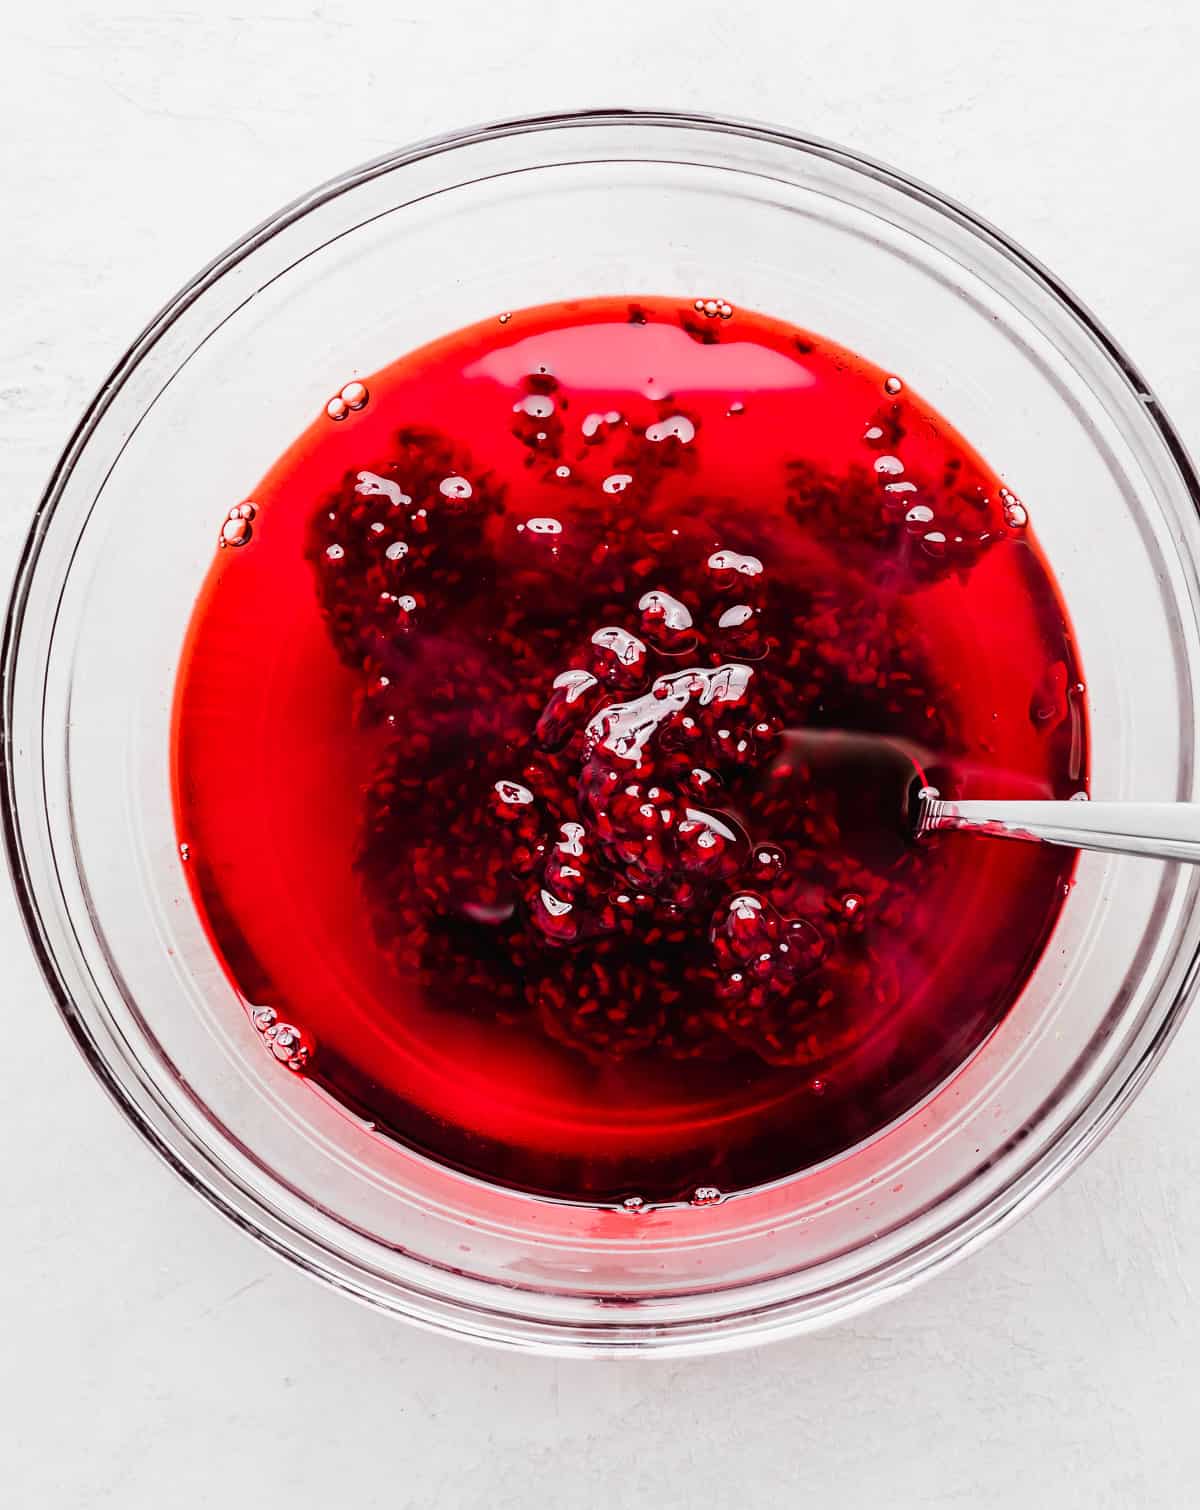 Bright red liquid jell-o with a raspberry topping sauce being stirred into it.